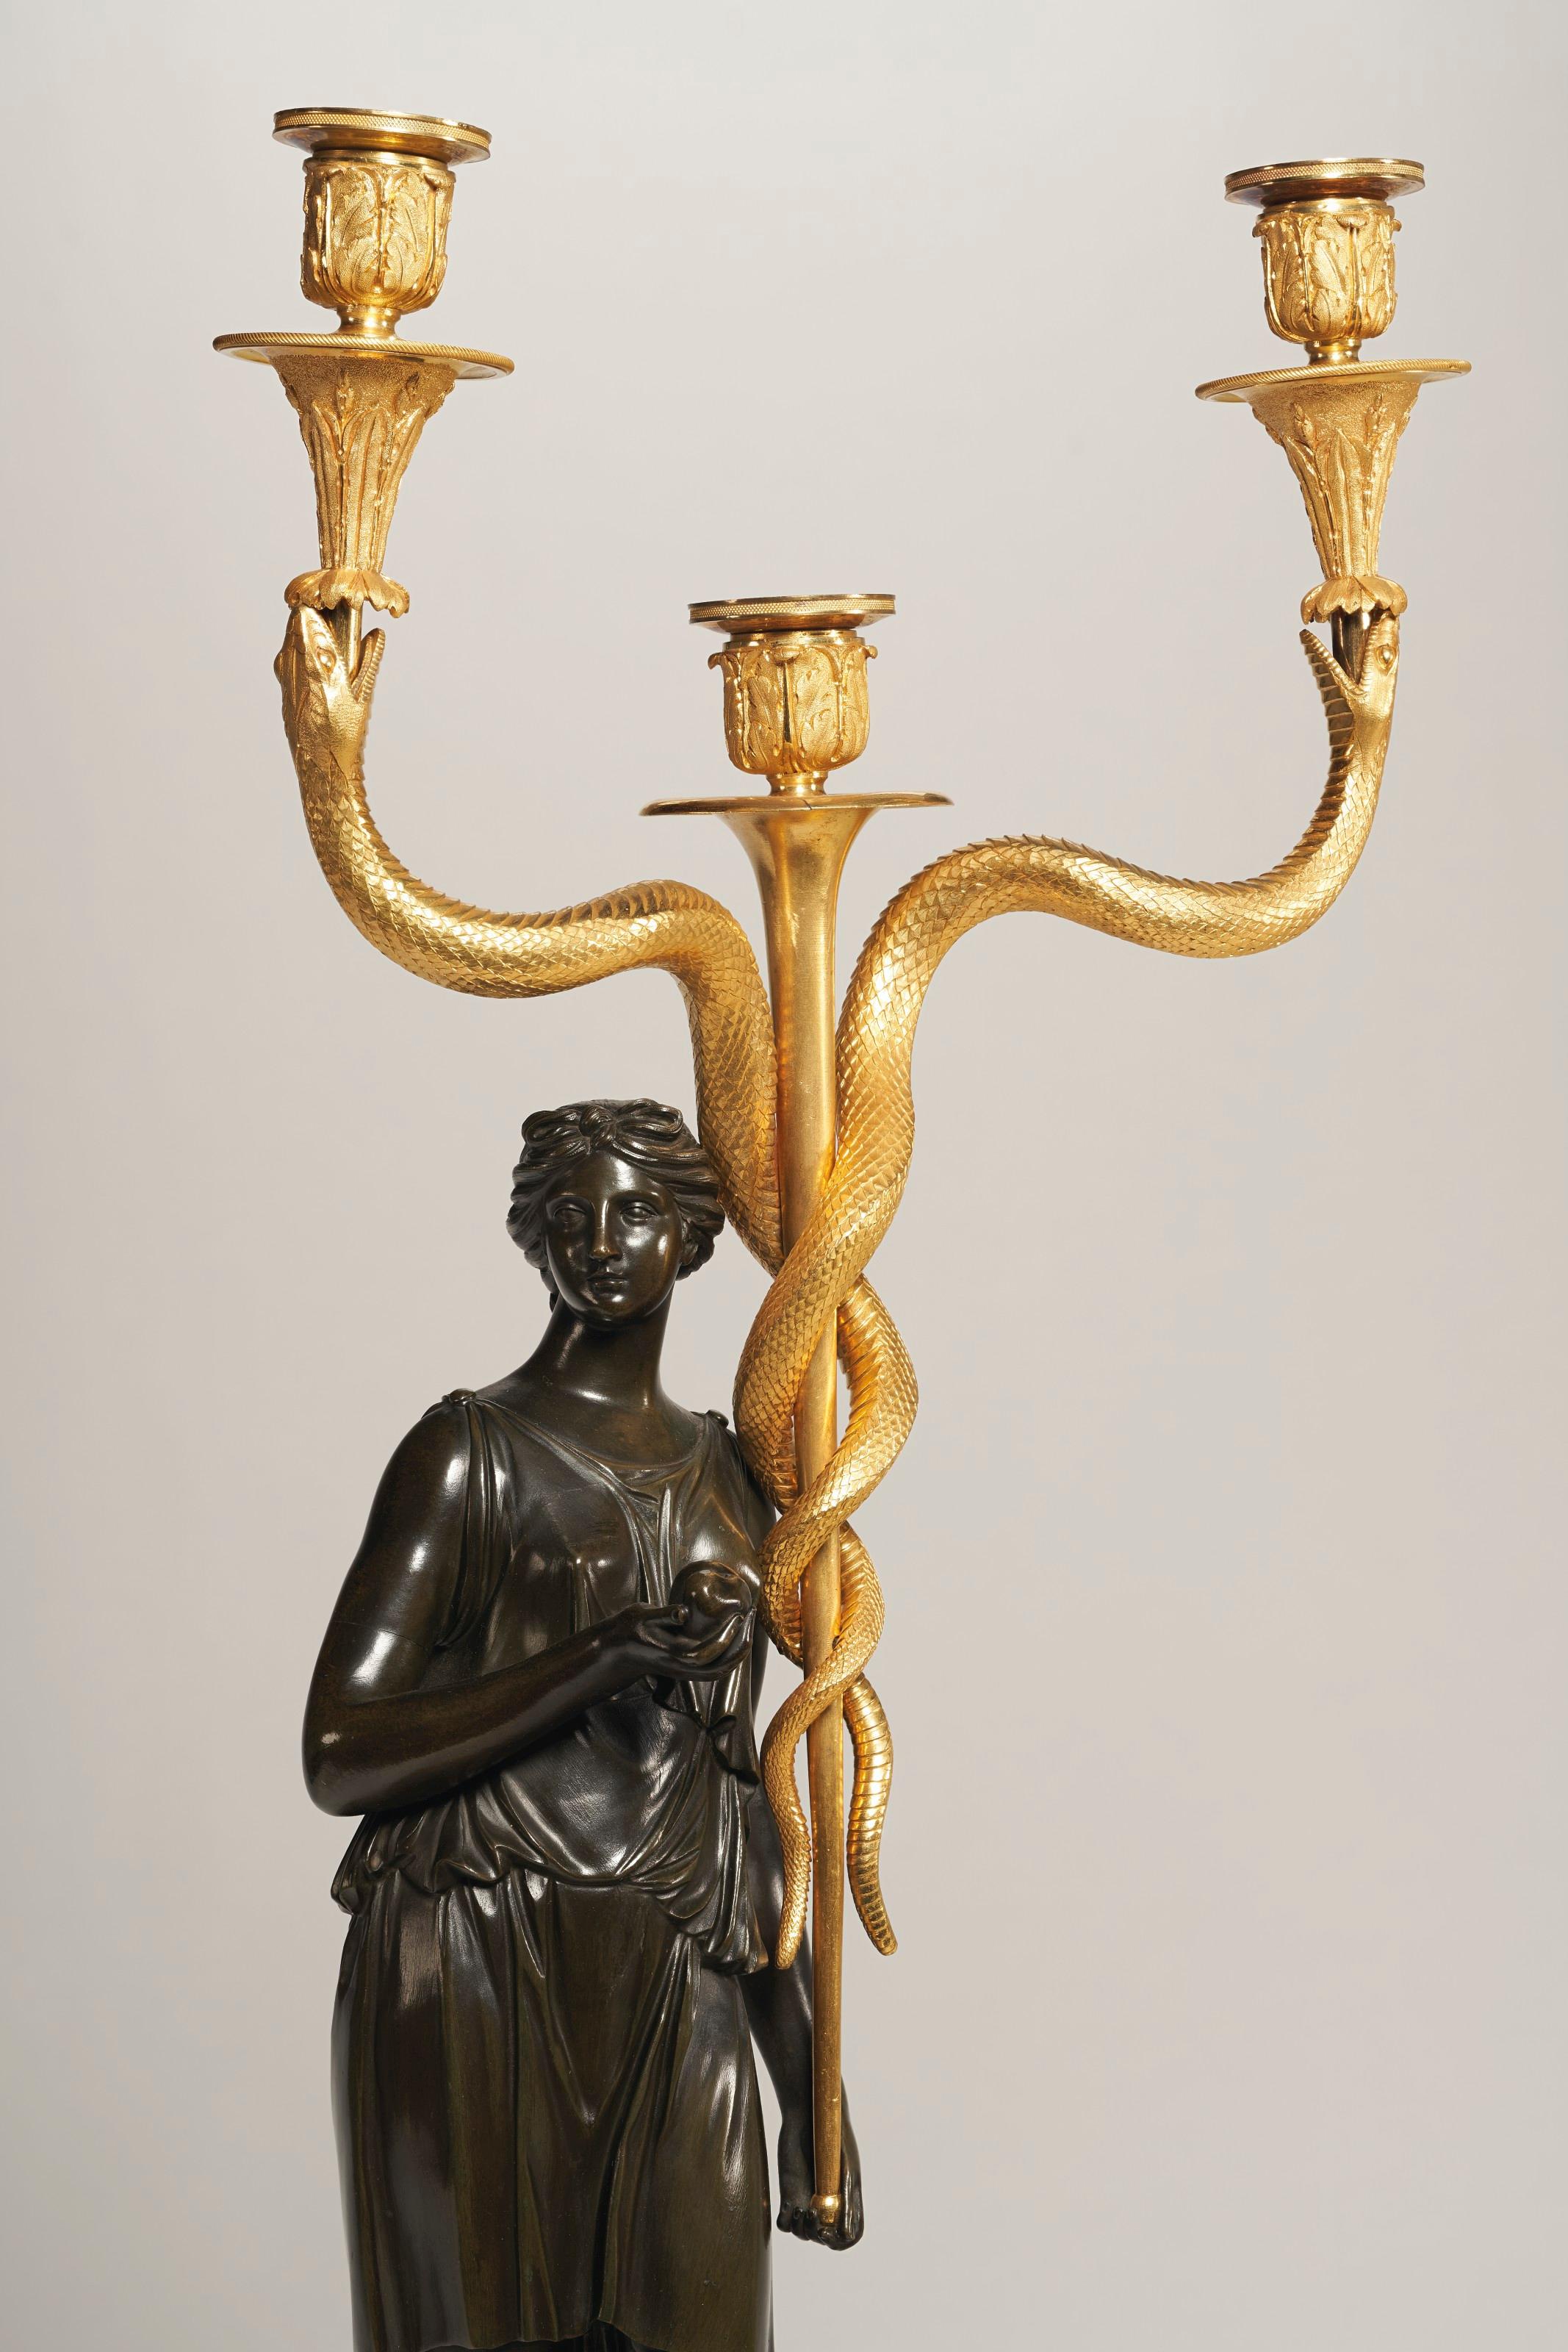 19th Century French Empire Style Ormolu and Patinated Bronze Figural Candelabra For Sale 2